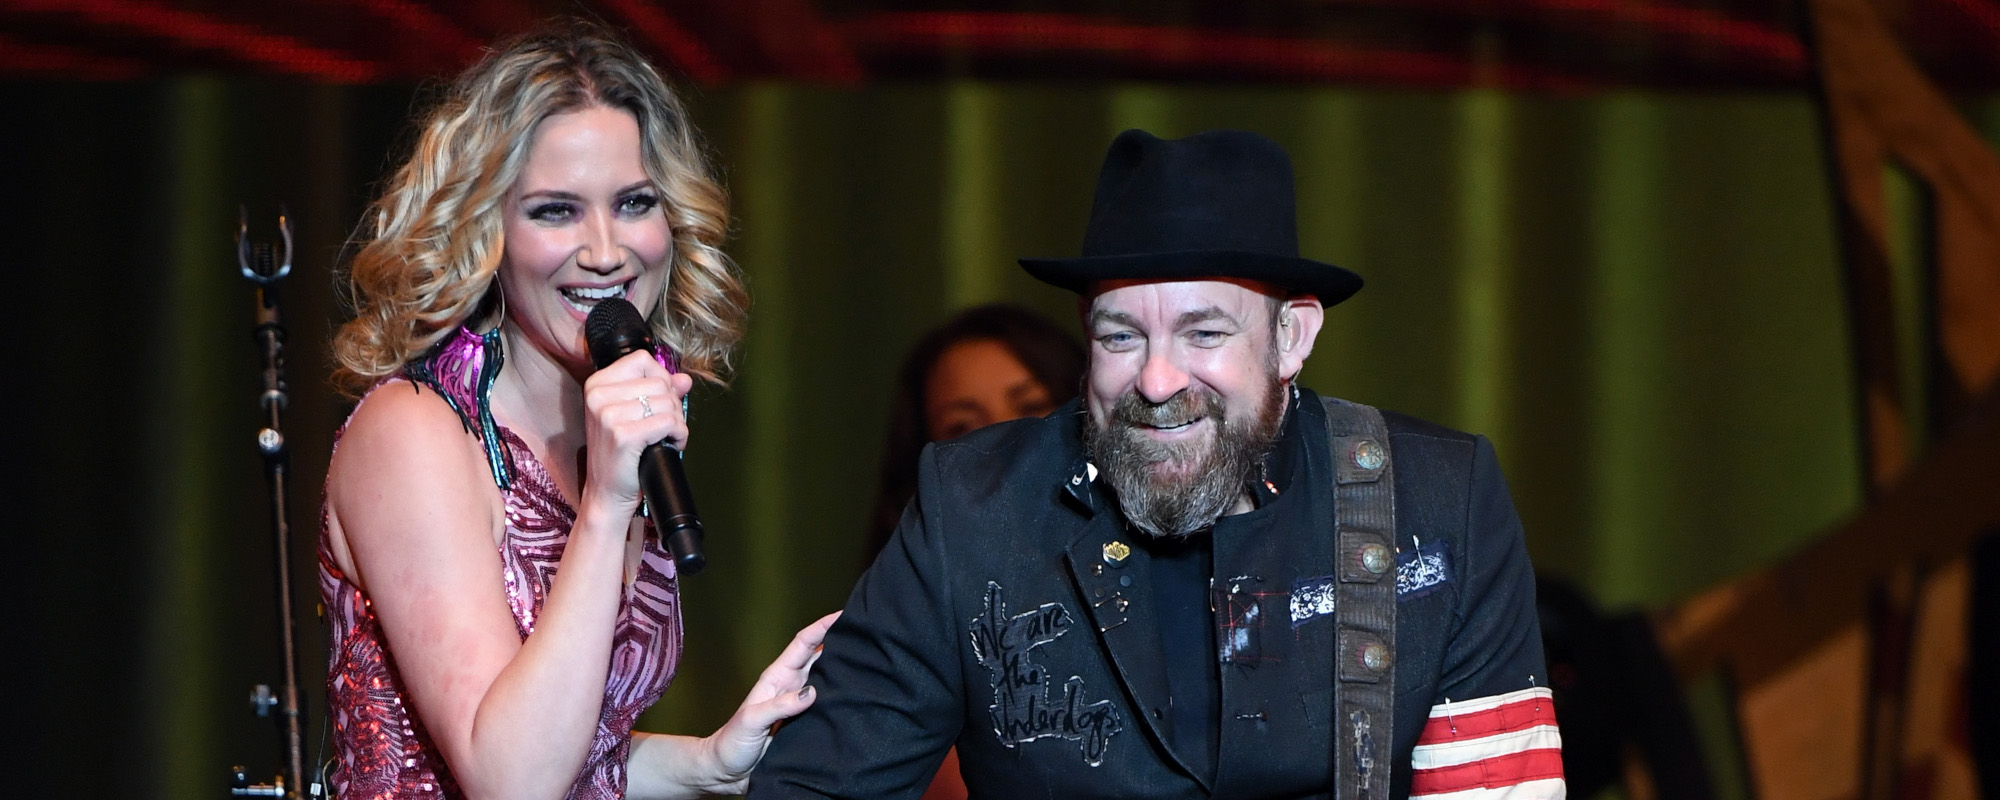 Behind the “Sweet” History of the Band Name: Sugarland